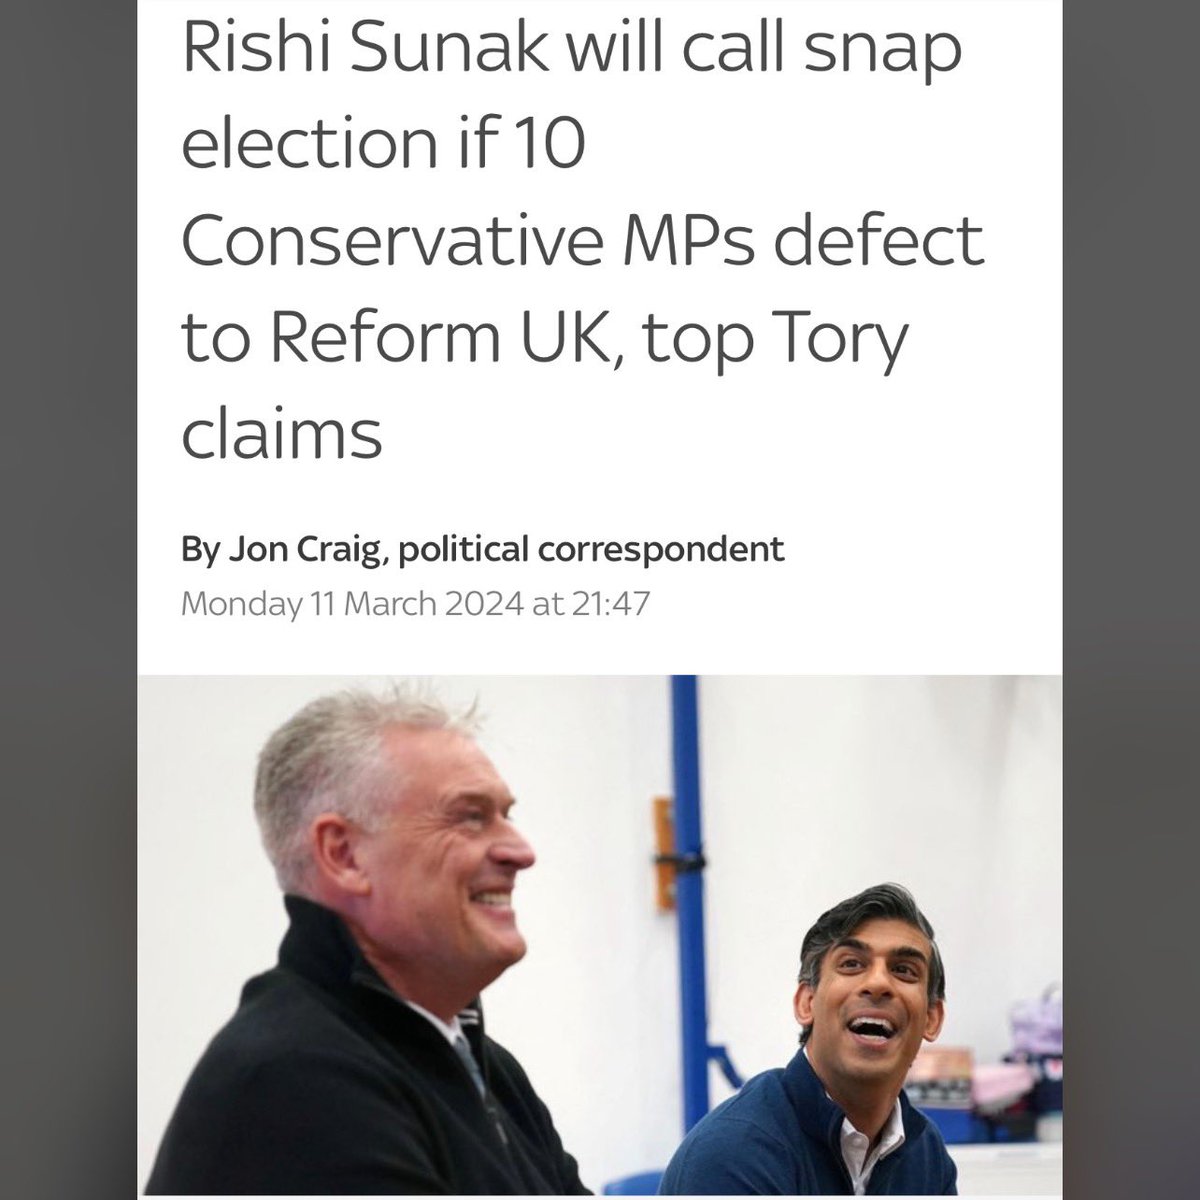 Rishi Sunak will call snap election if 10 Tory MPs defect to Reform 

@SkyNews reports from Top Tory at 1922 committee bash 

Who will the 10 be?
Lee Anderson 
And.....